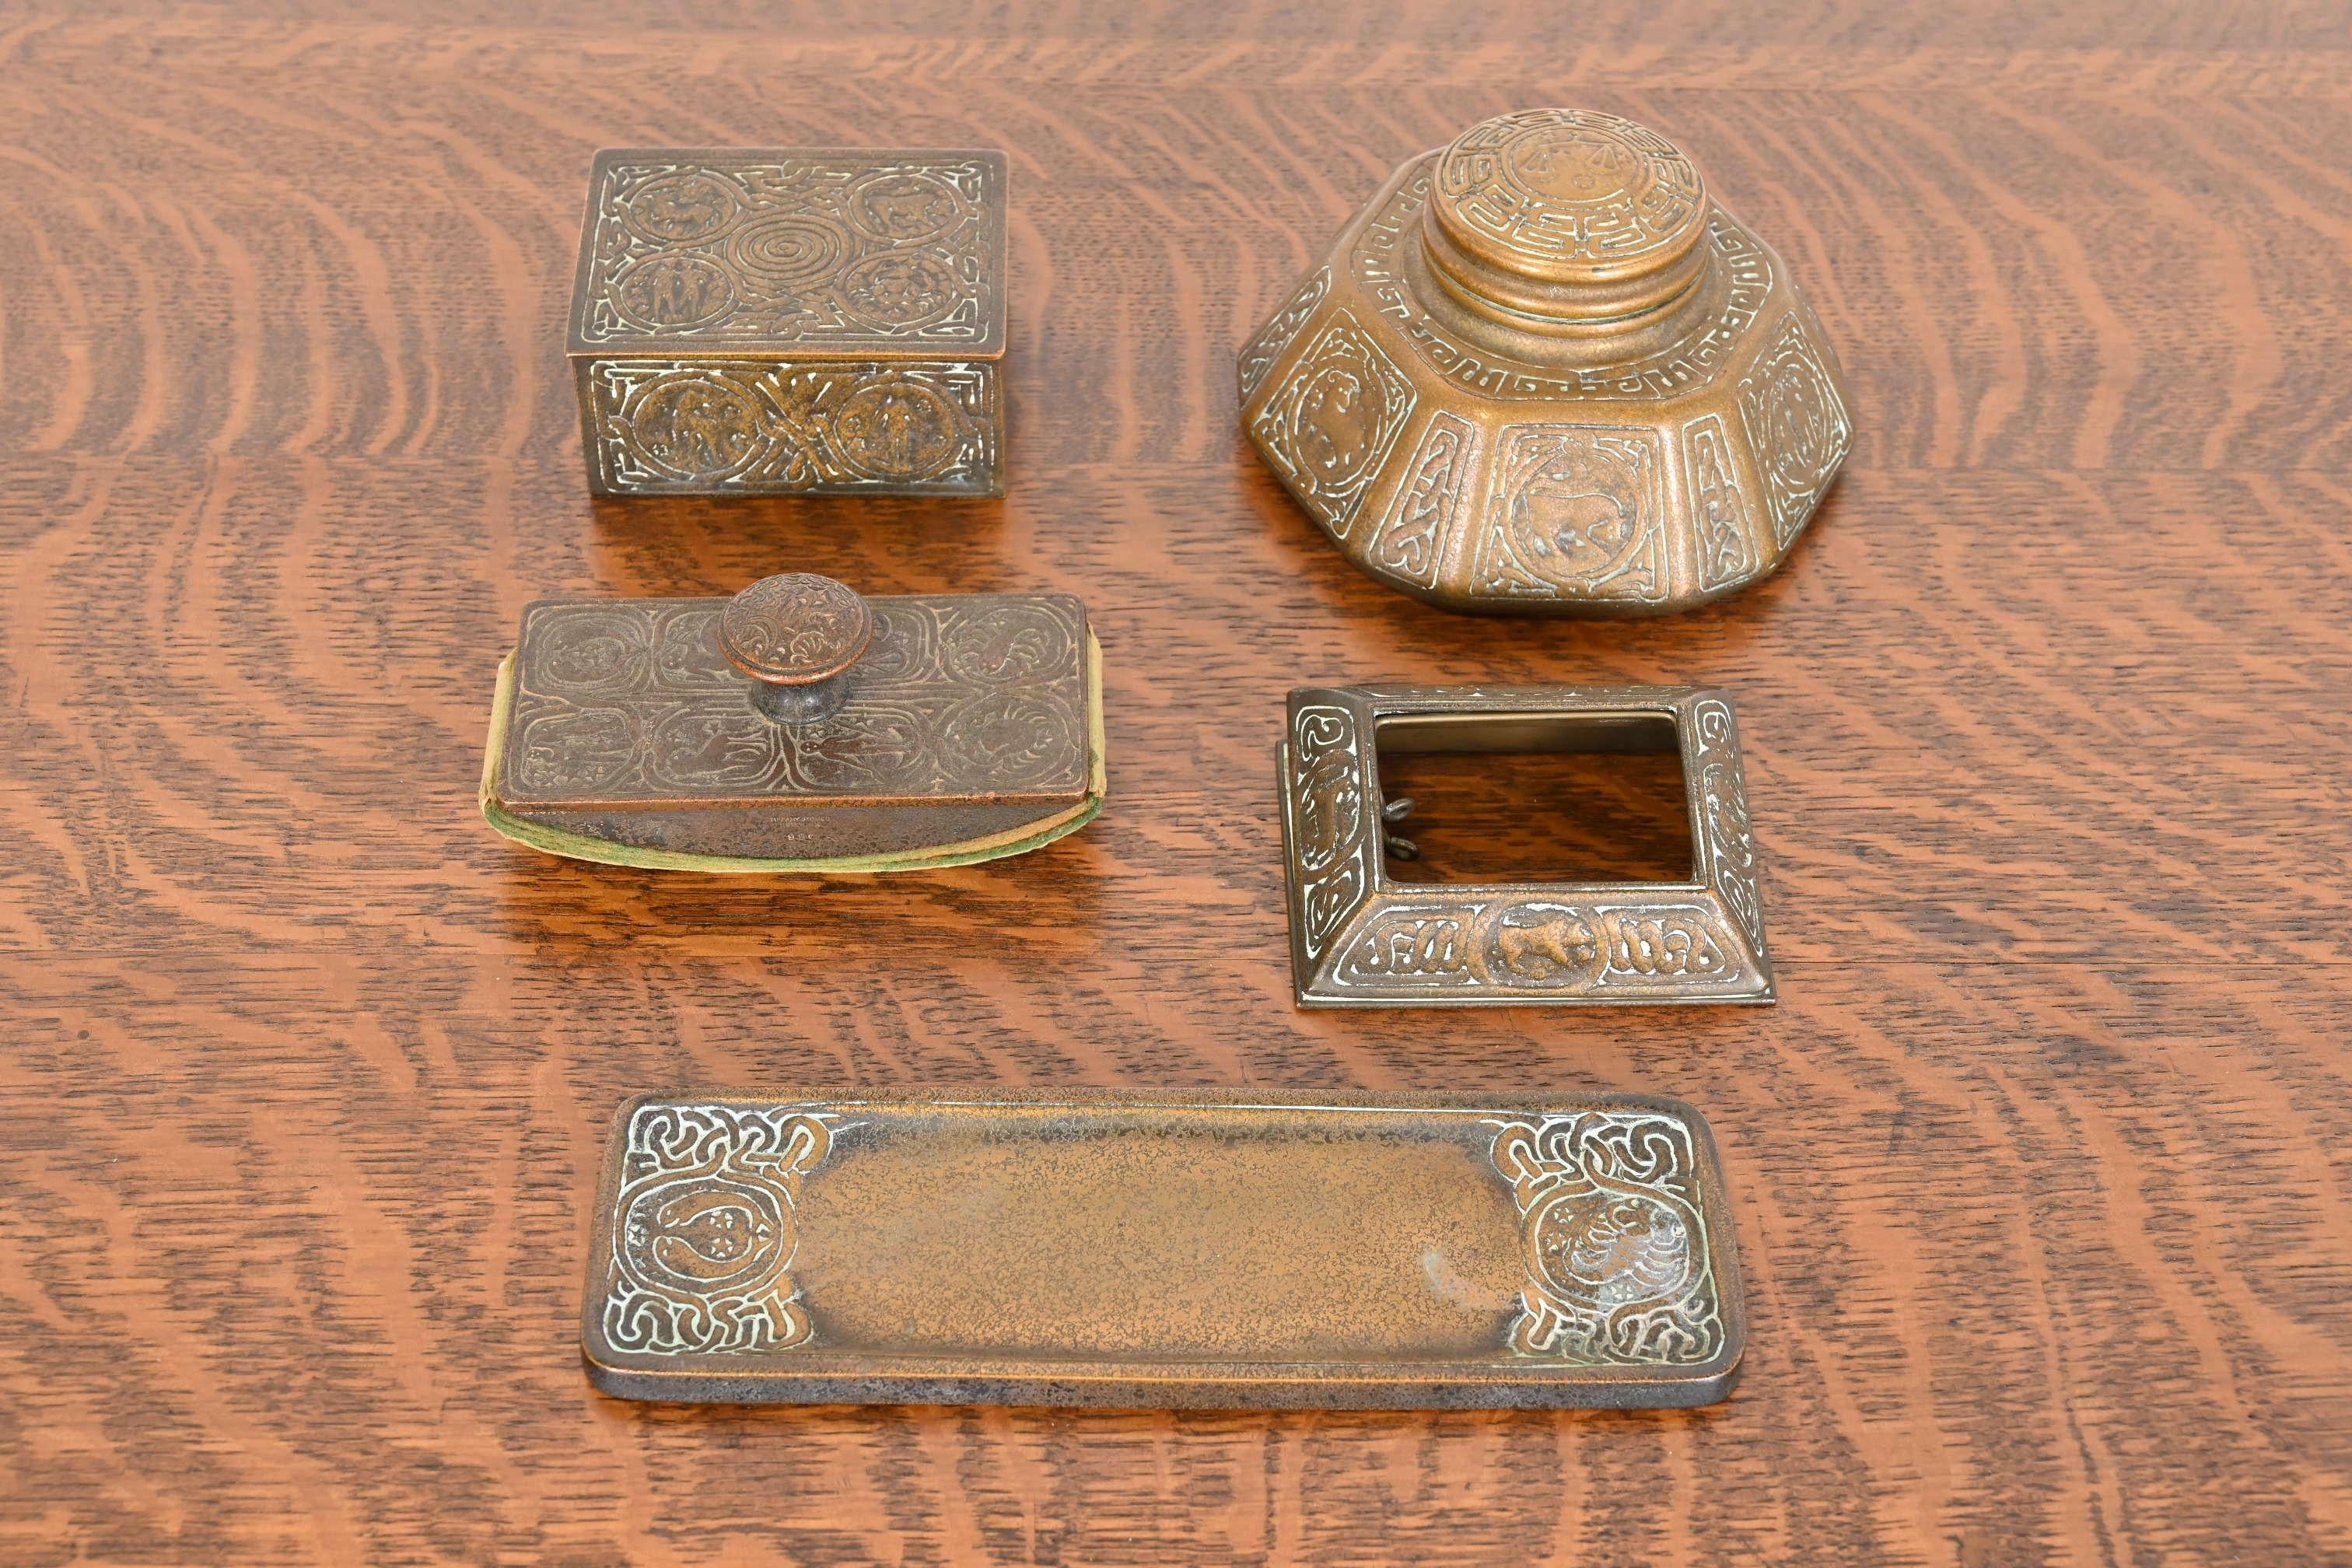 An outstanding bronze desk set featuring Zodiac designs. The five-piece set includes: desk calendar holder or picture frame, large inkwell, pen tray, desk box, and rocker blotter.

By Tiffany Studios

New York, USA, Early 20th